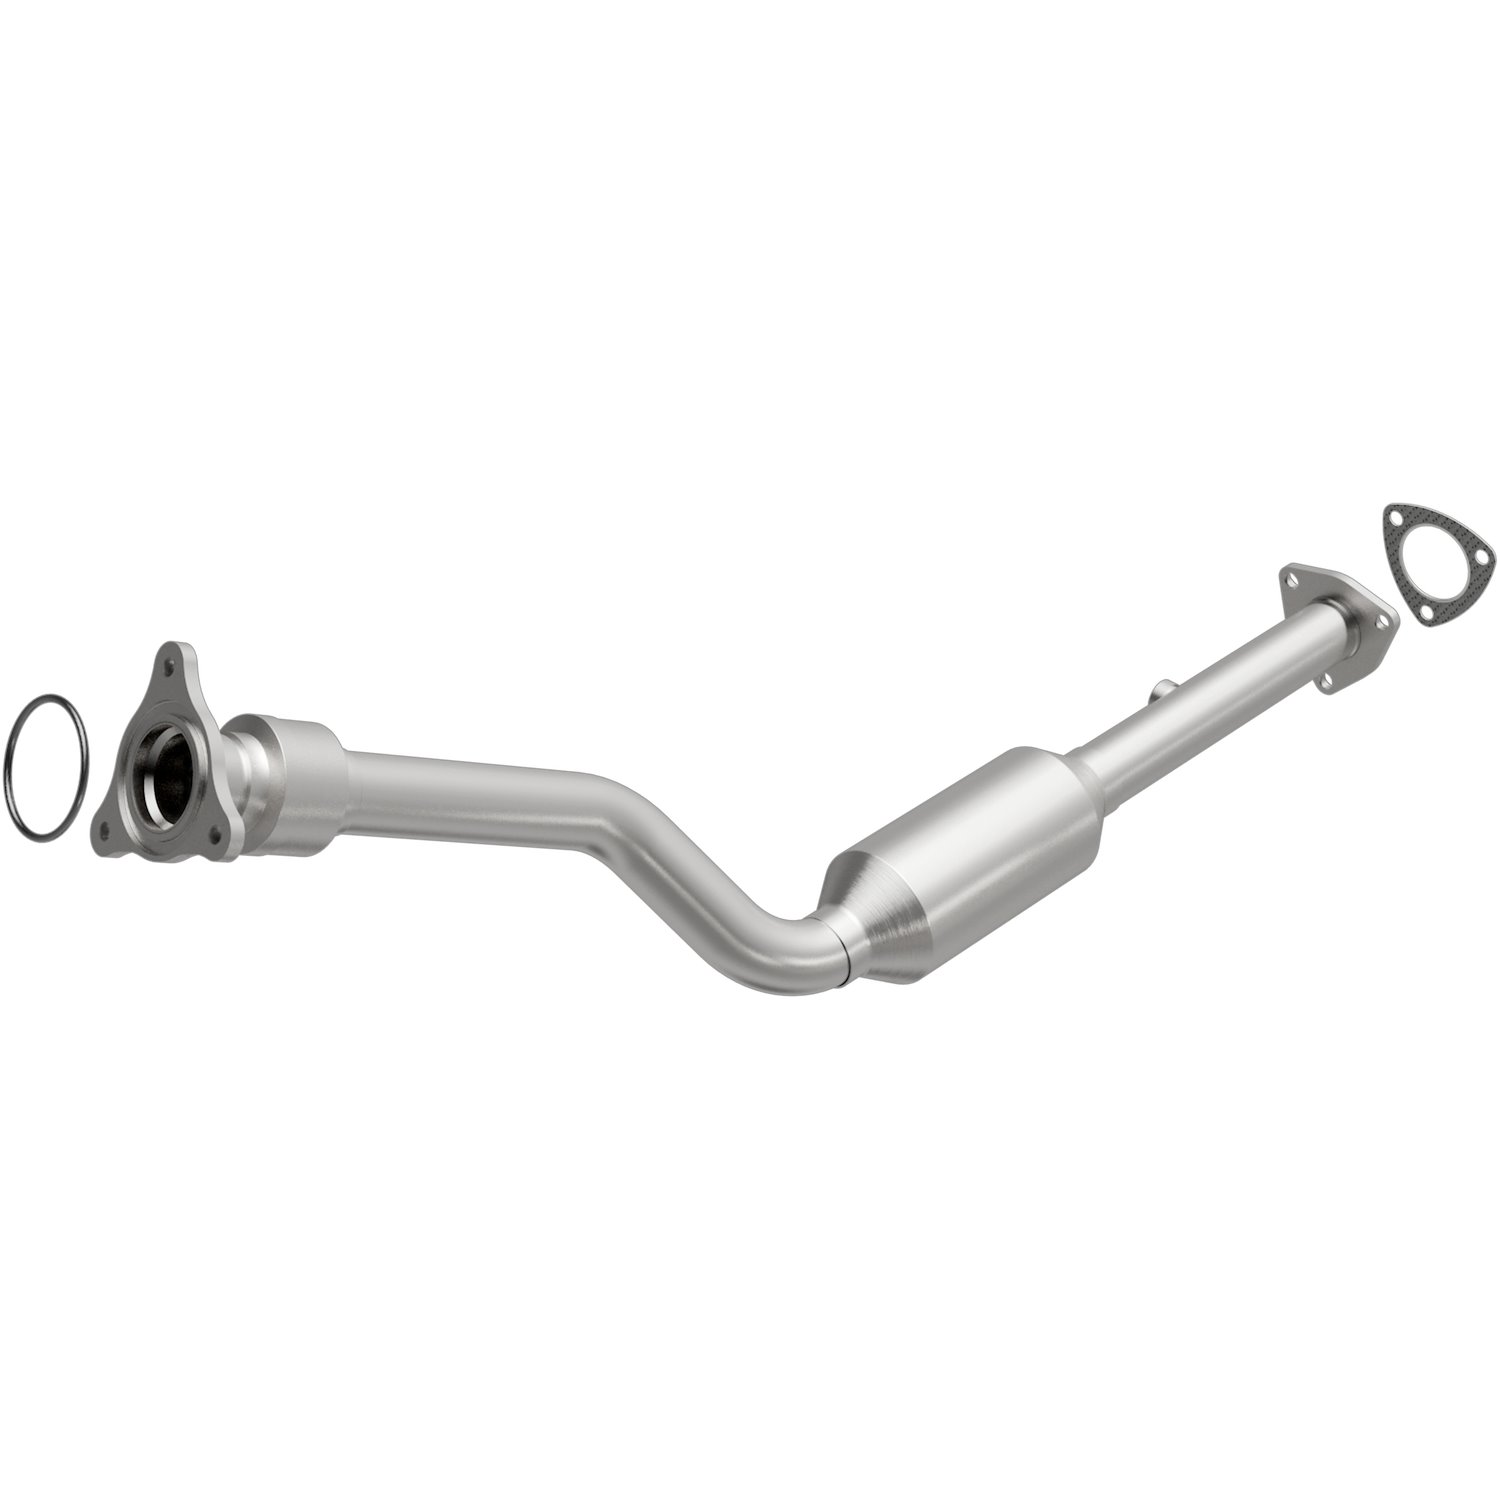 HM Grade Federal / EPA Compliant Direct-Fit Catalytic Converter 93146